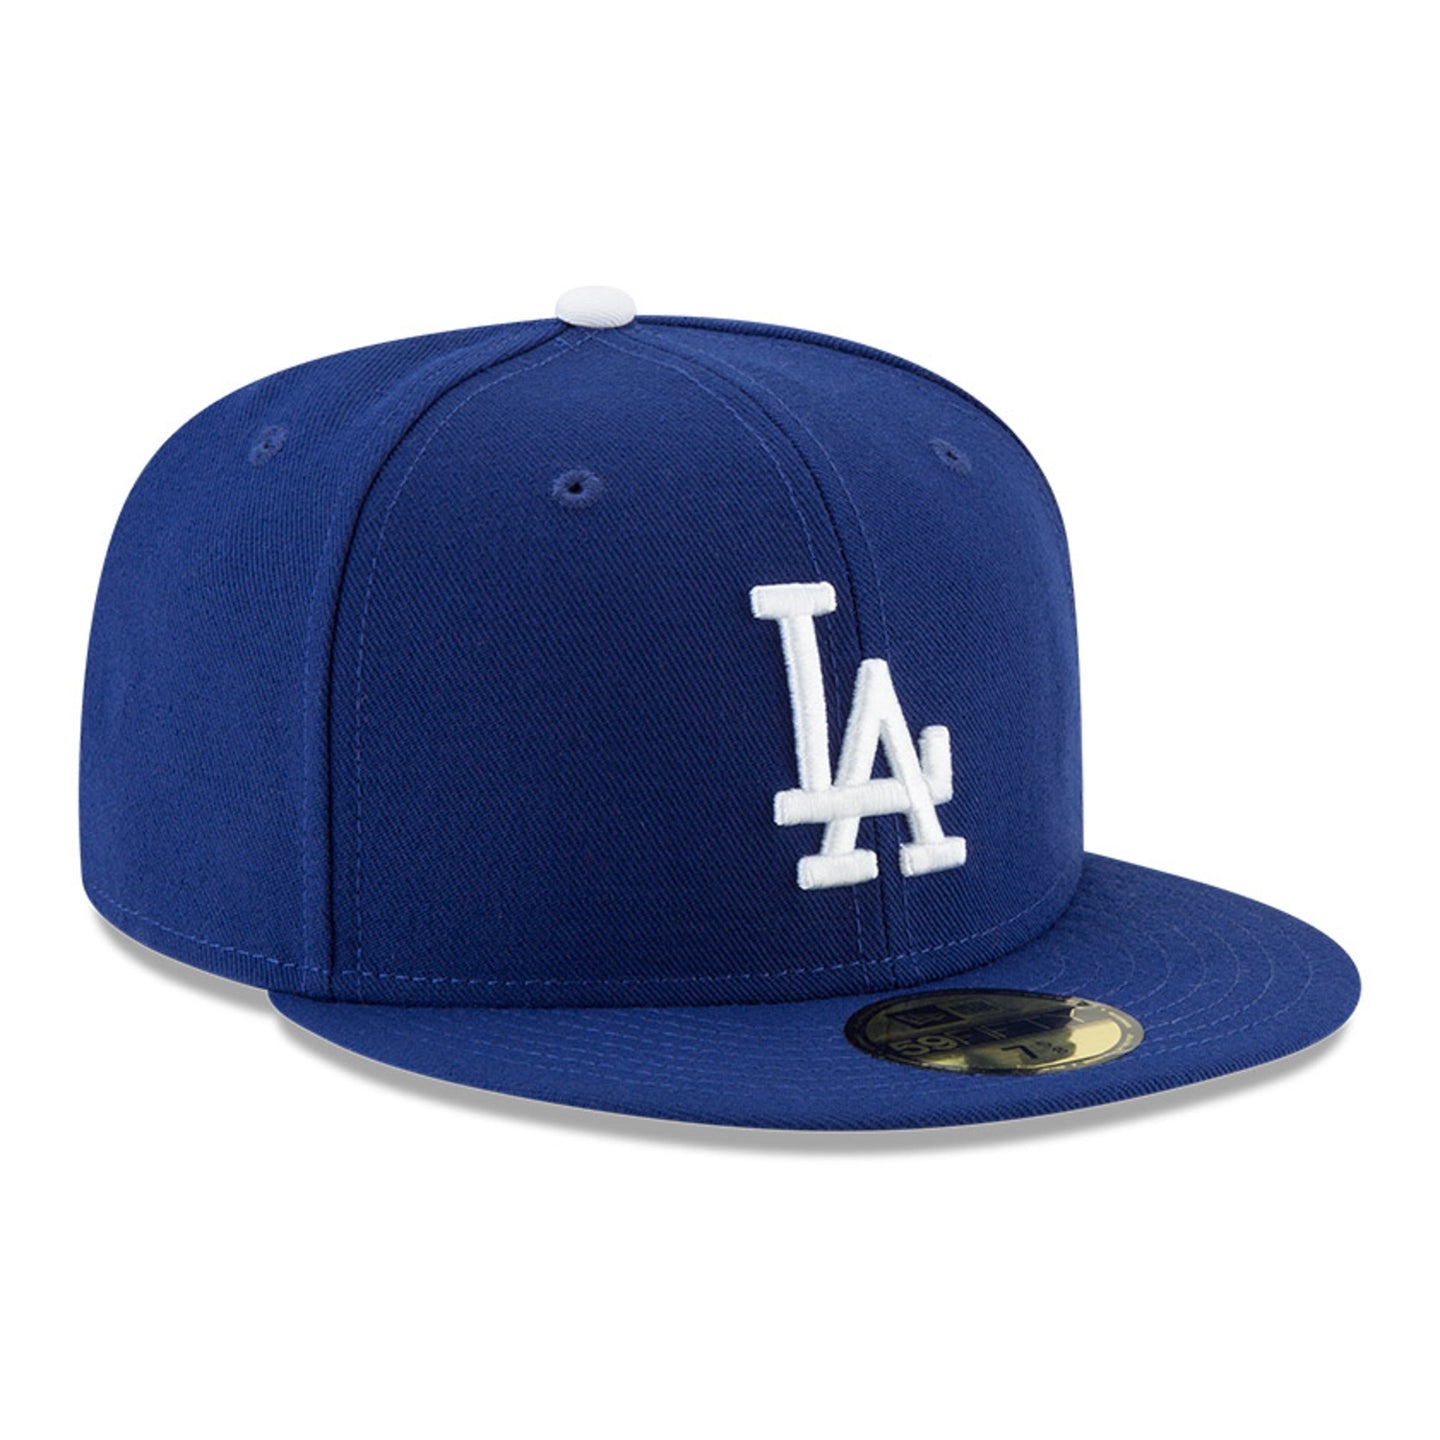 New Era 59Fifty Authentic Collection Los Angeles Dodgers Game Hat - Ro ...